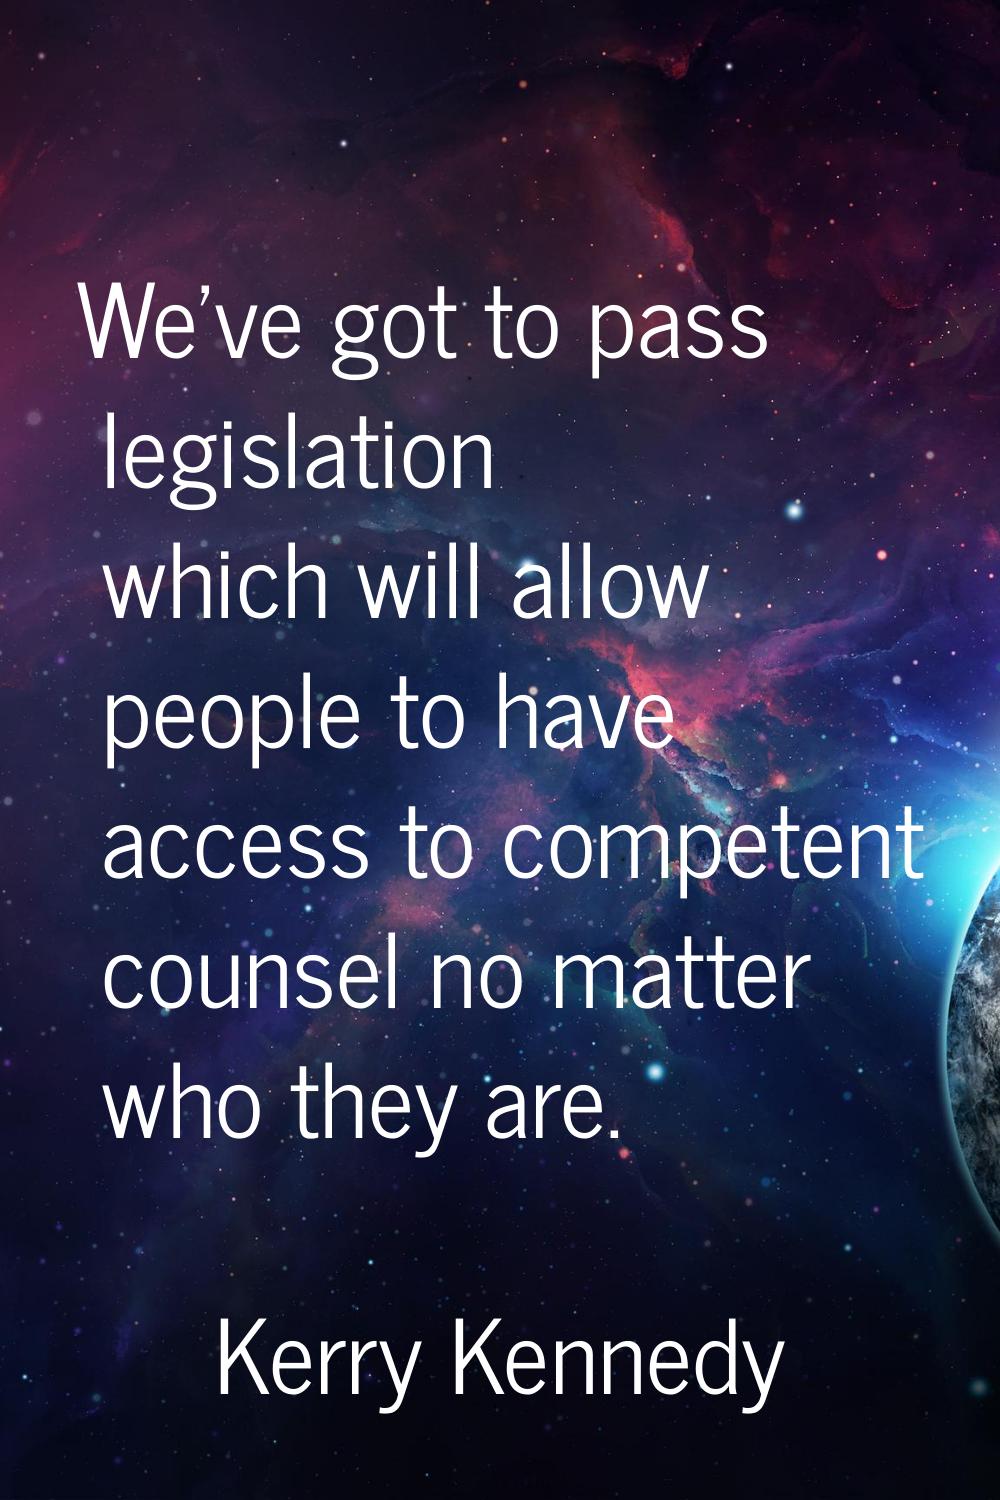 We've got to pass legislation which will allow people to have access to competent counsel no matter